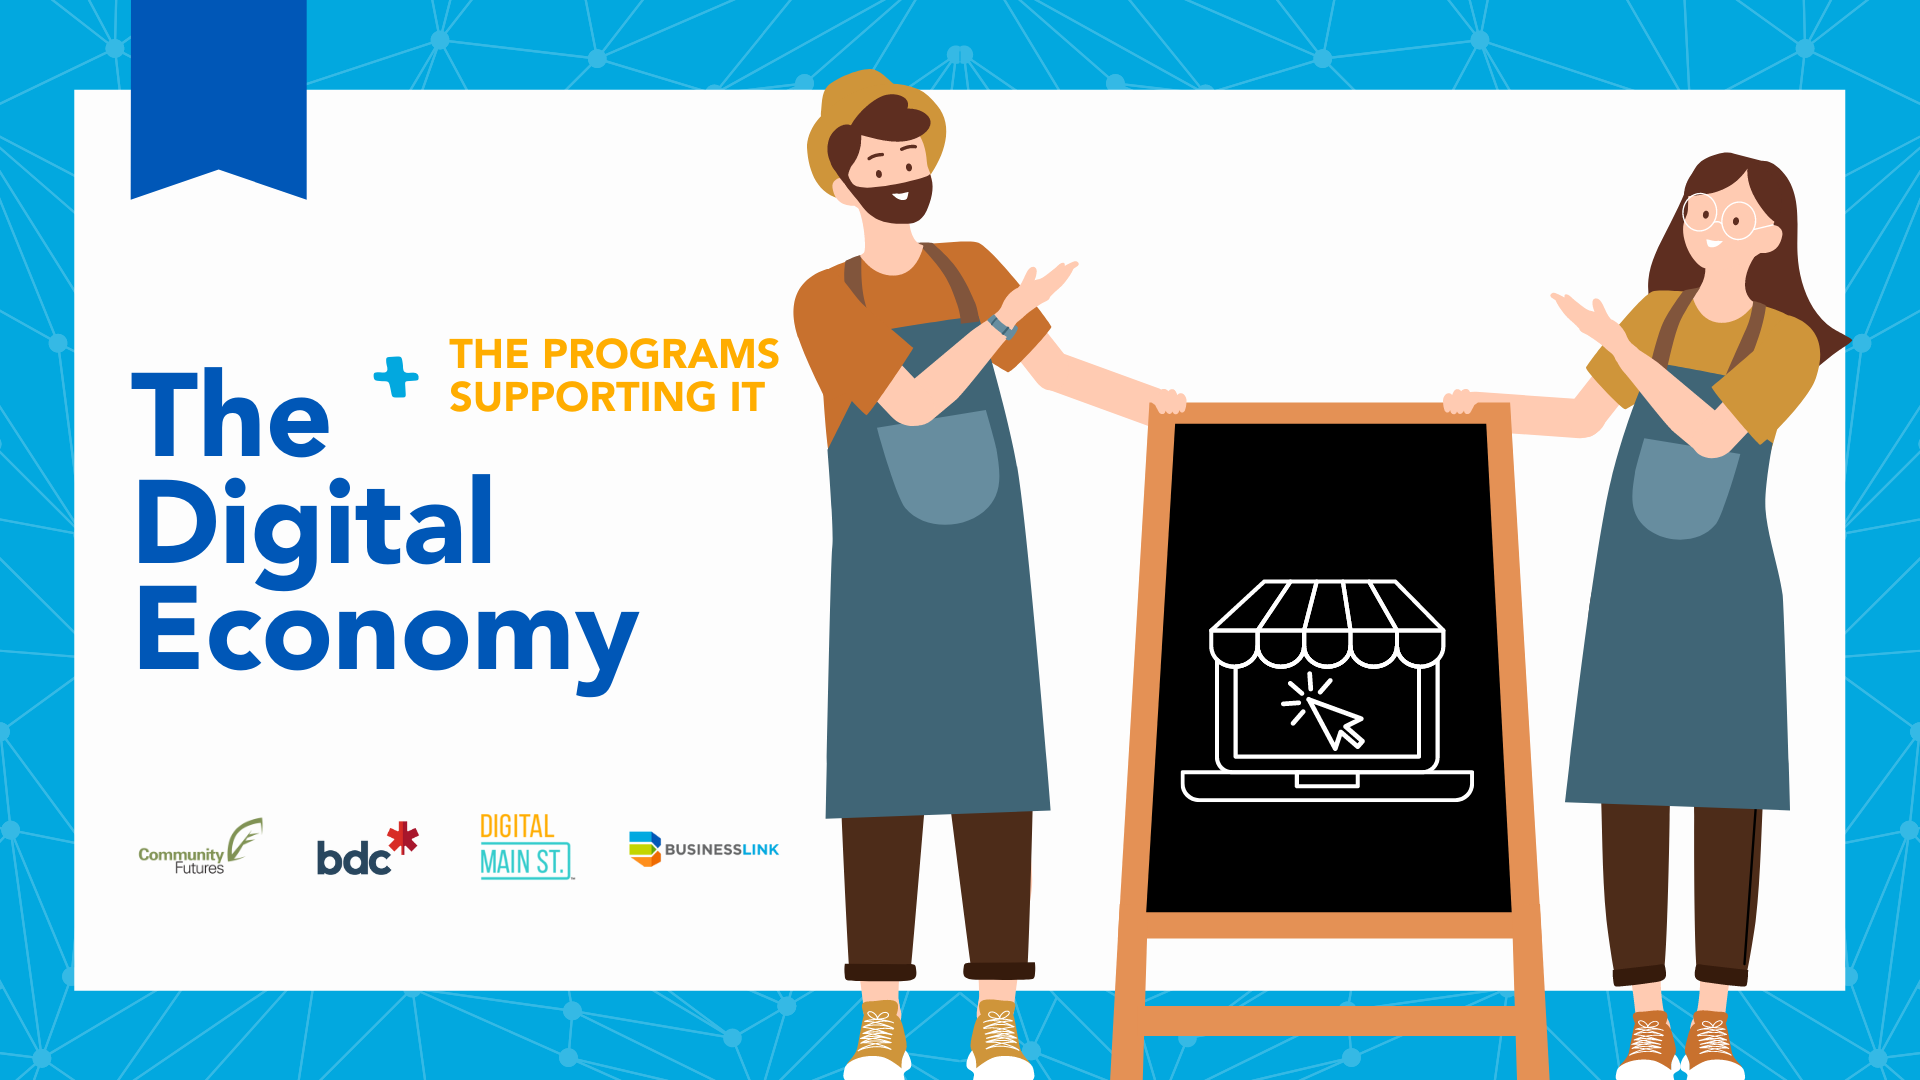 Learn About New Programs Available to Small Businesses Looking to Go Digital